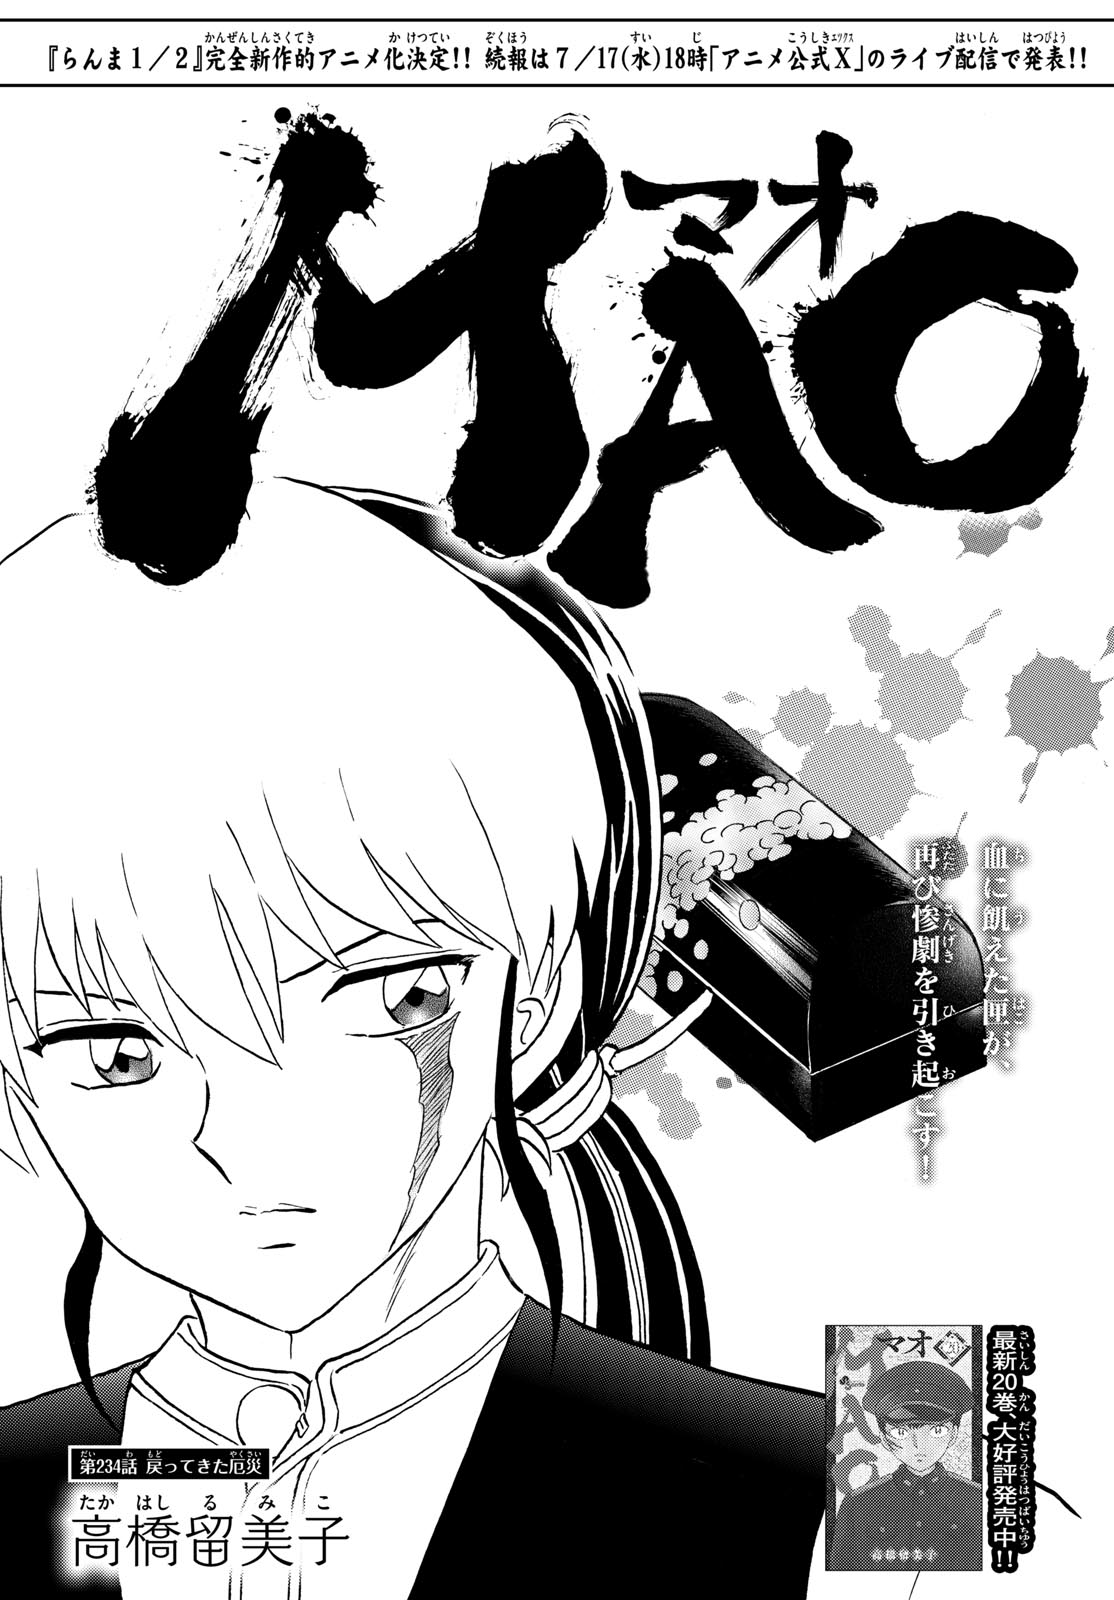 MAO - Chapter 234 - Page 1